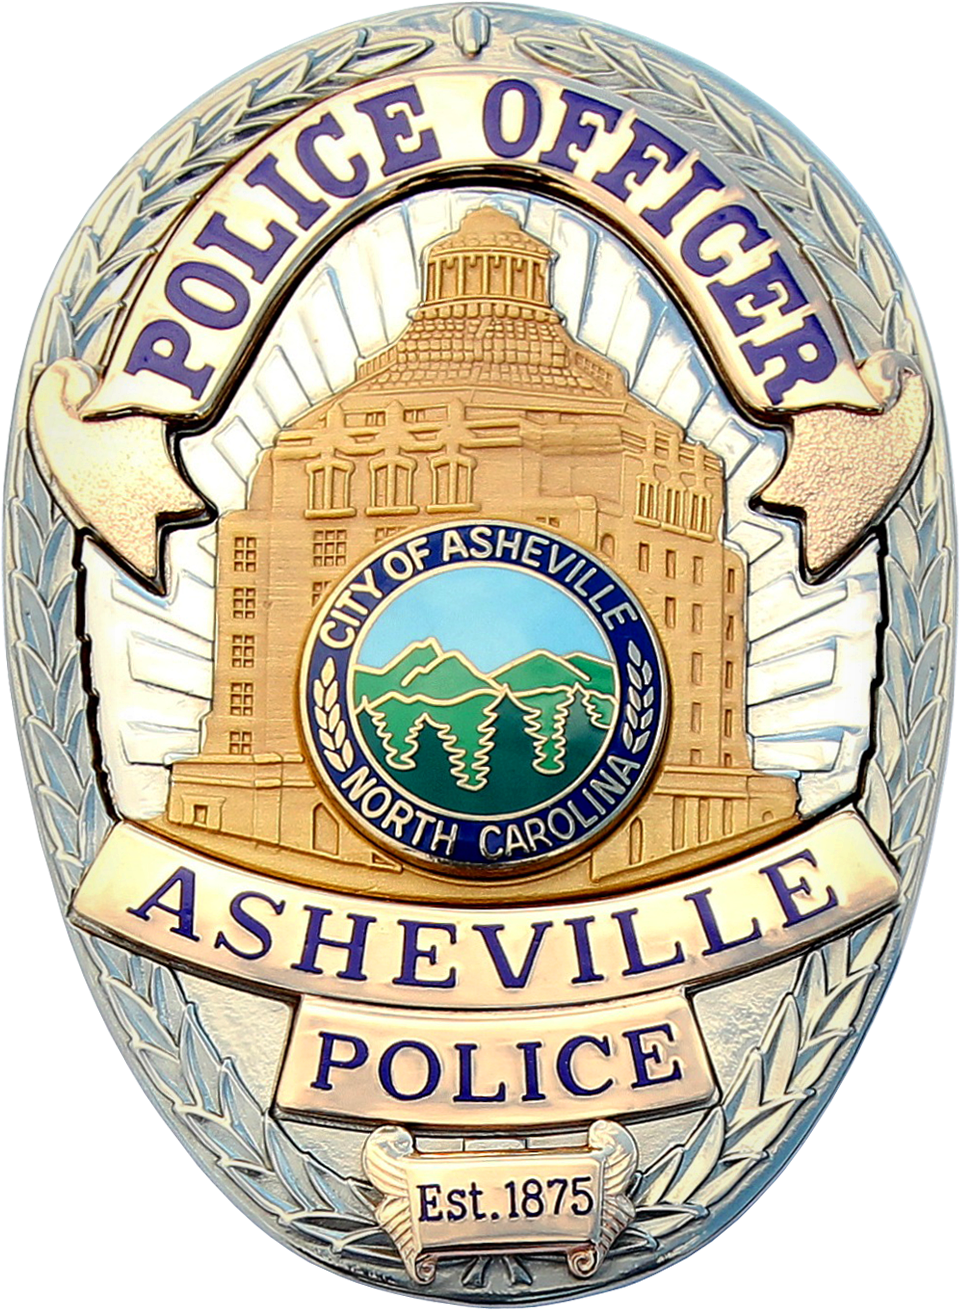 Asheville Police Department
Professional Standards